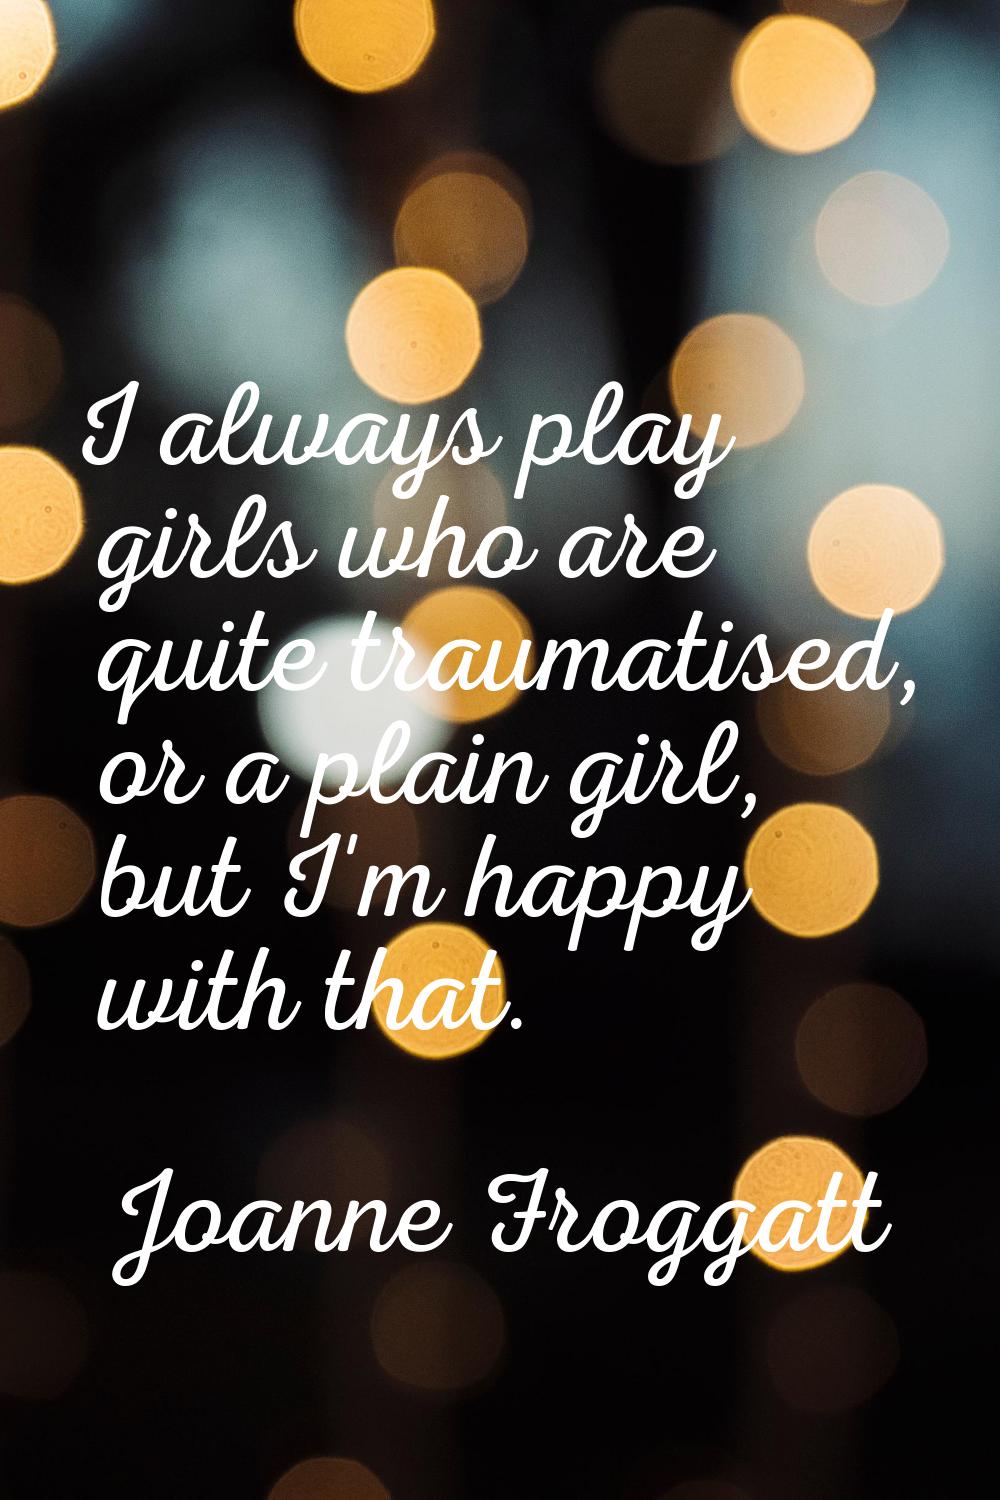 I always play girls who are quite traumatised, or a plain girl, but I'm happy with that.